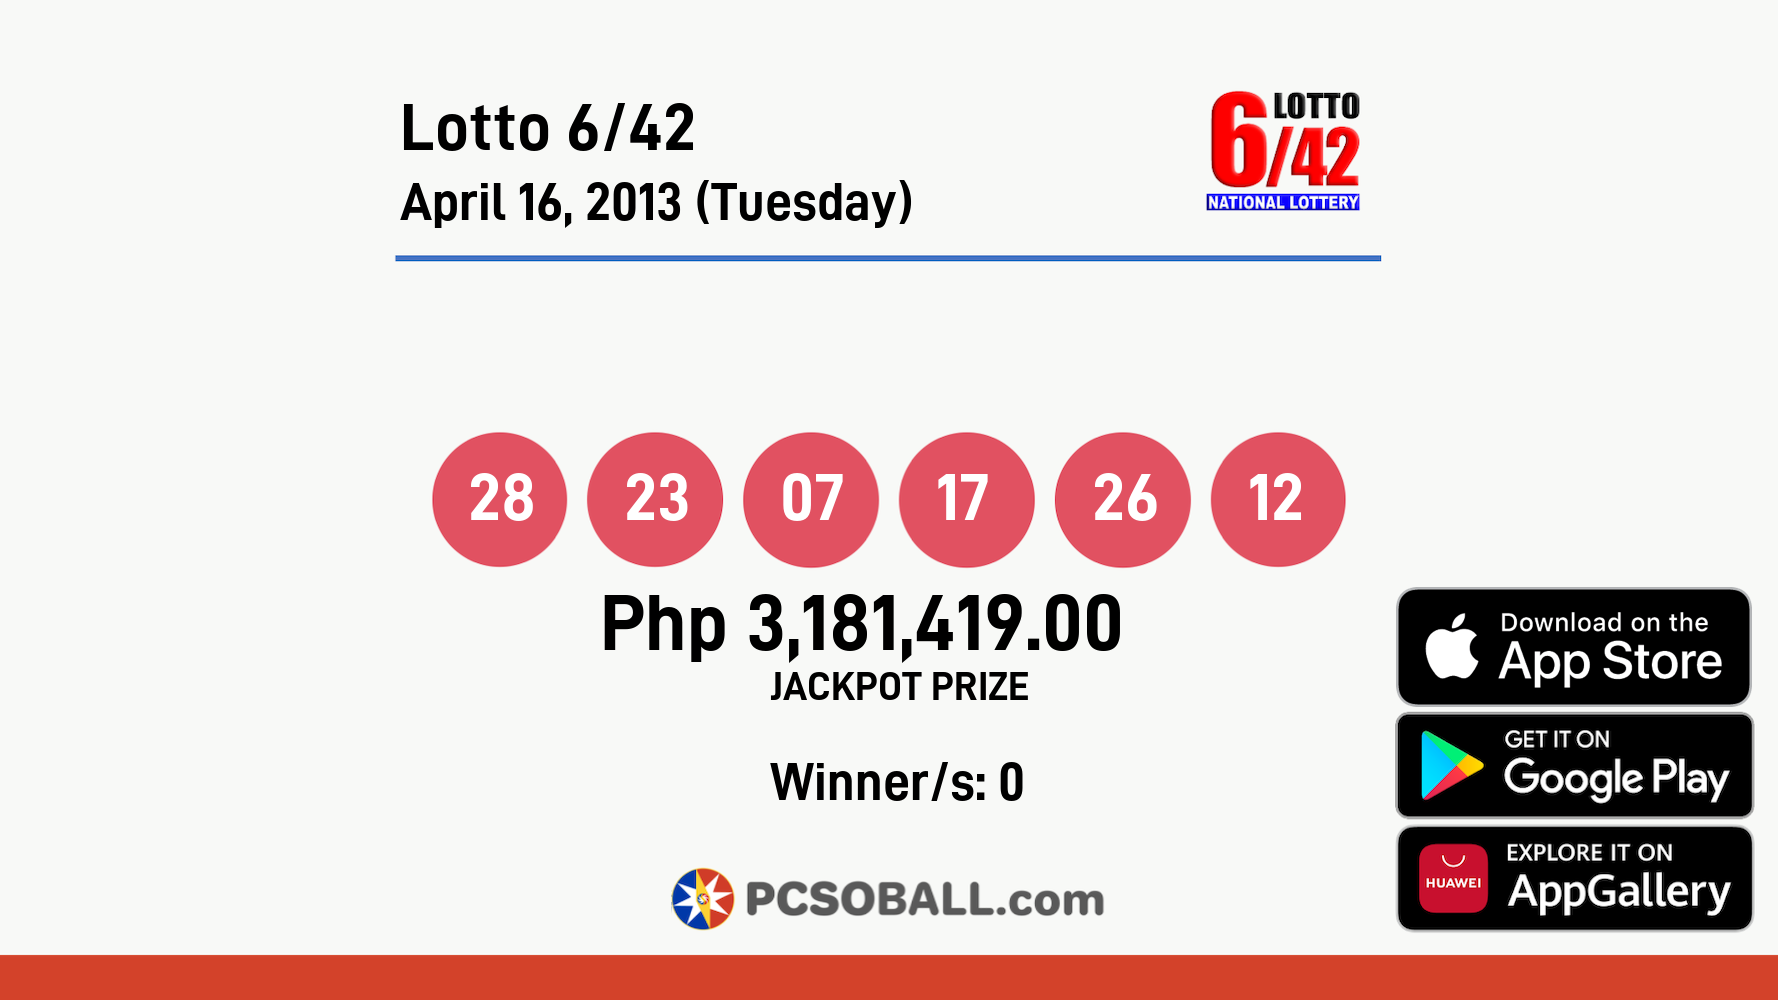 Lotto 6/42 April 16, 2013 (Tuesday) Result